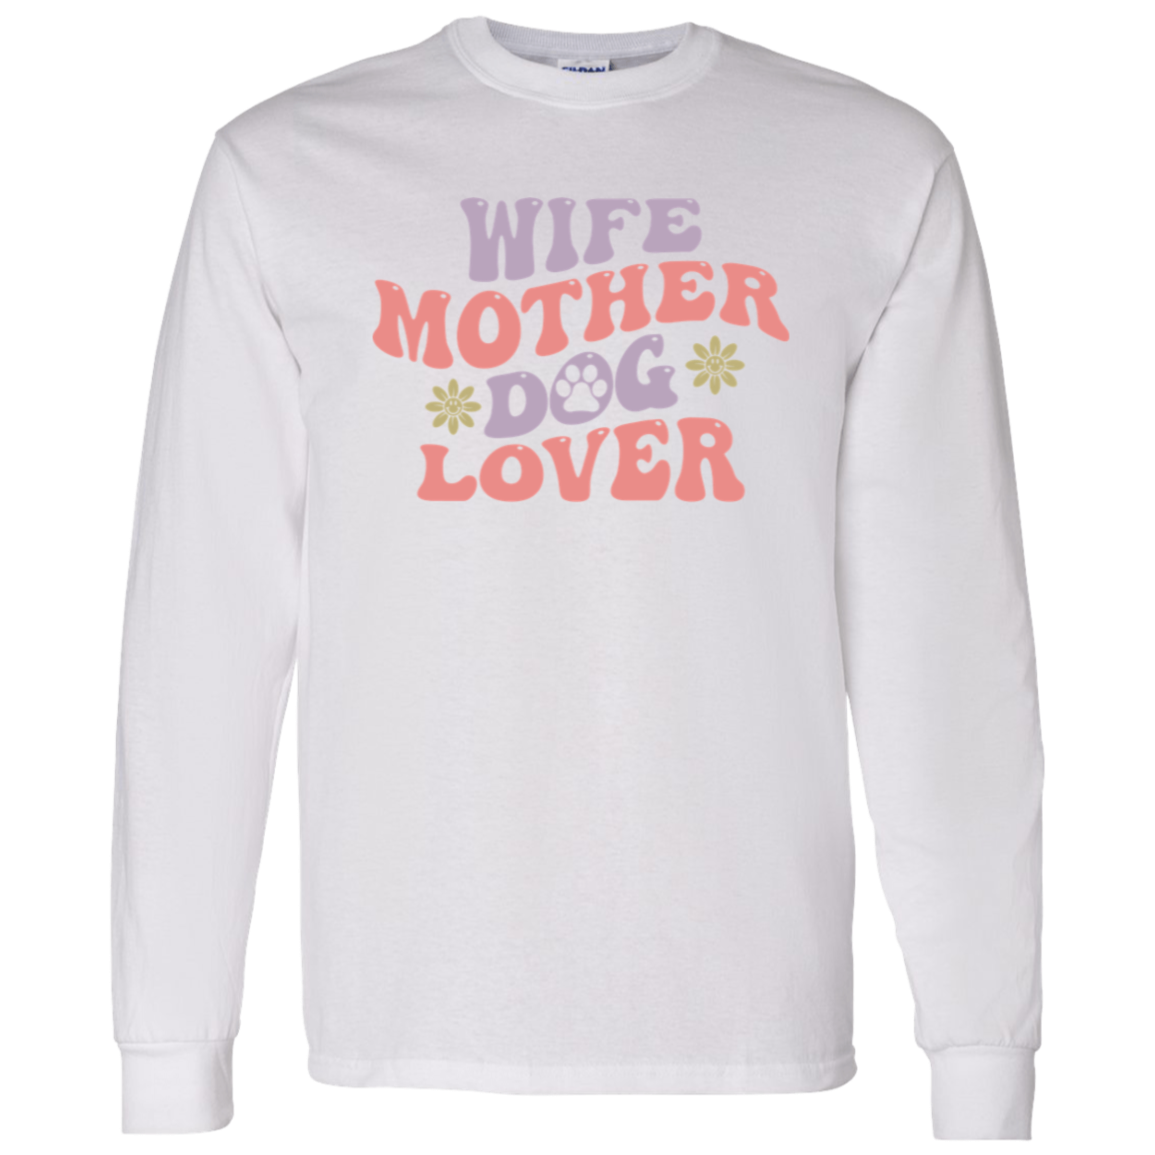 Wife Mother Dog Lover Rescue Mom Long Sleeve T-Shirt